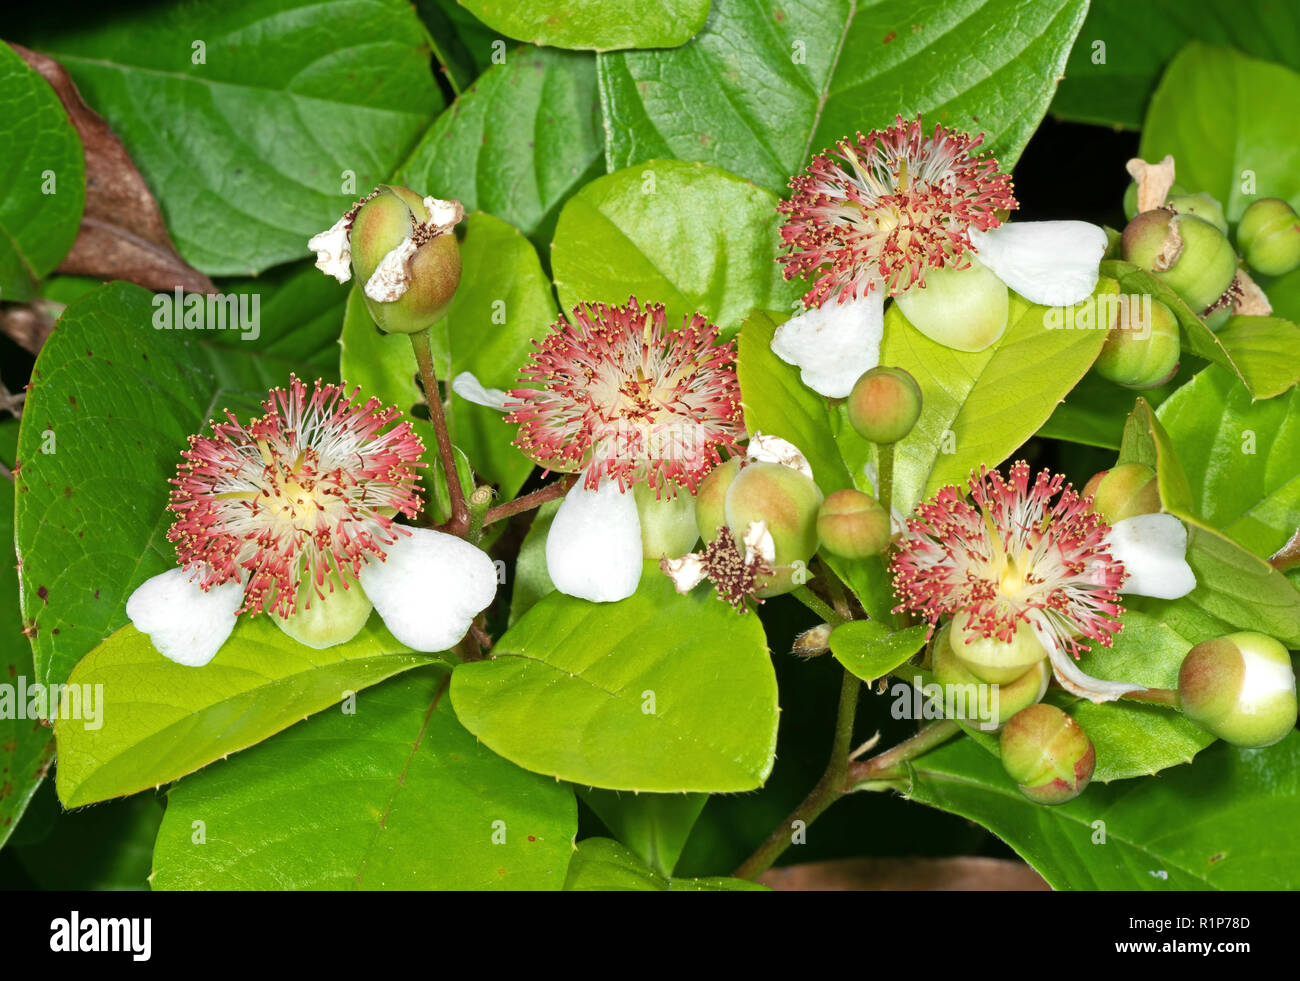 Closeup Group of Tetracera indica Flowers with Green Buds Isolated on Nature Background Stock Photo